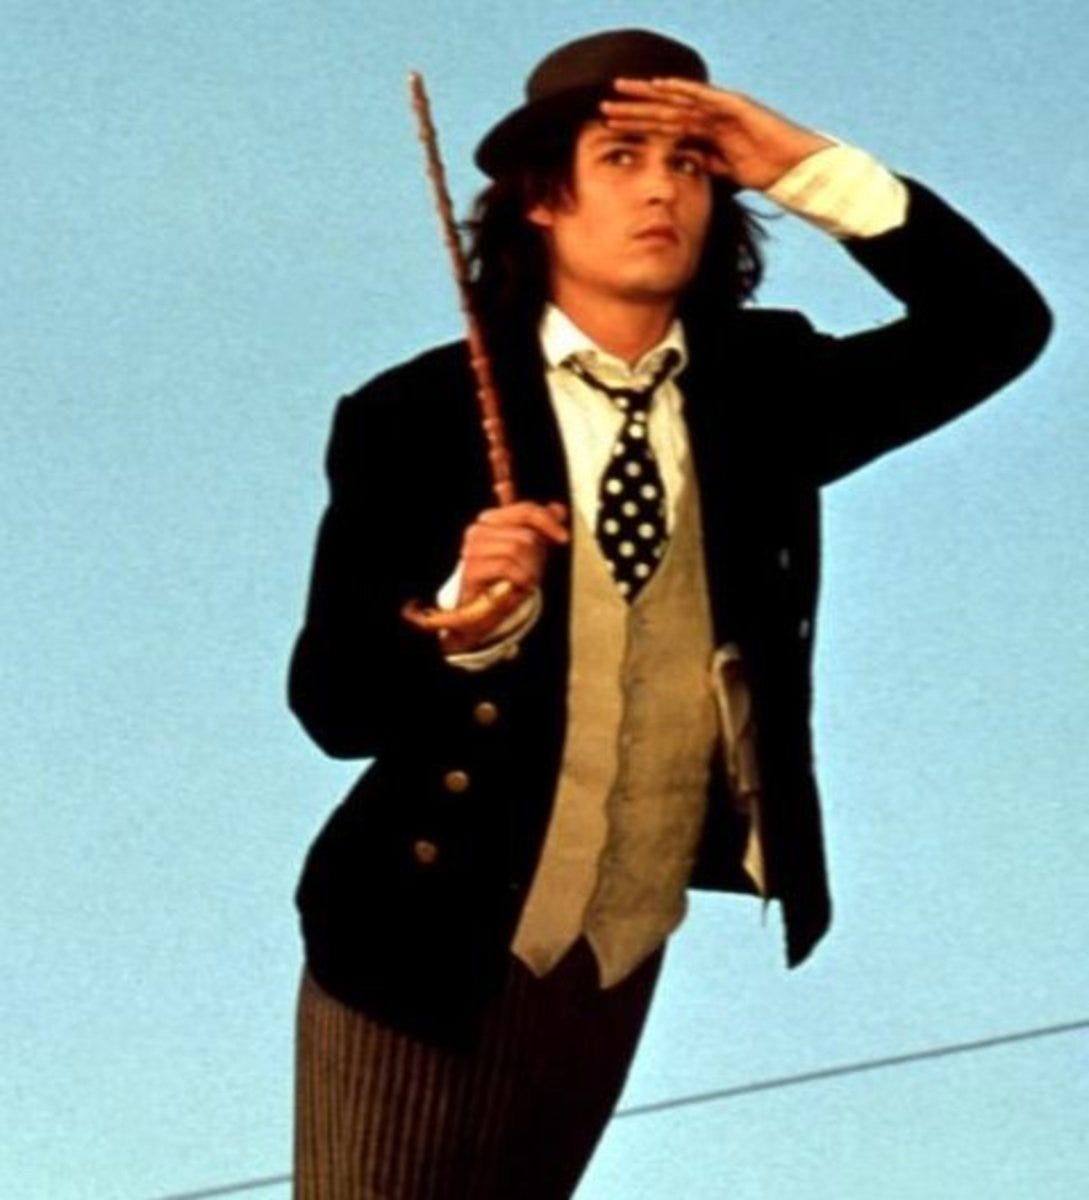 Dress Like Sam (Johnny Depp) from Benny and Joon - HubPages